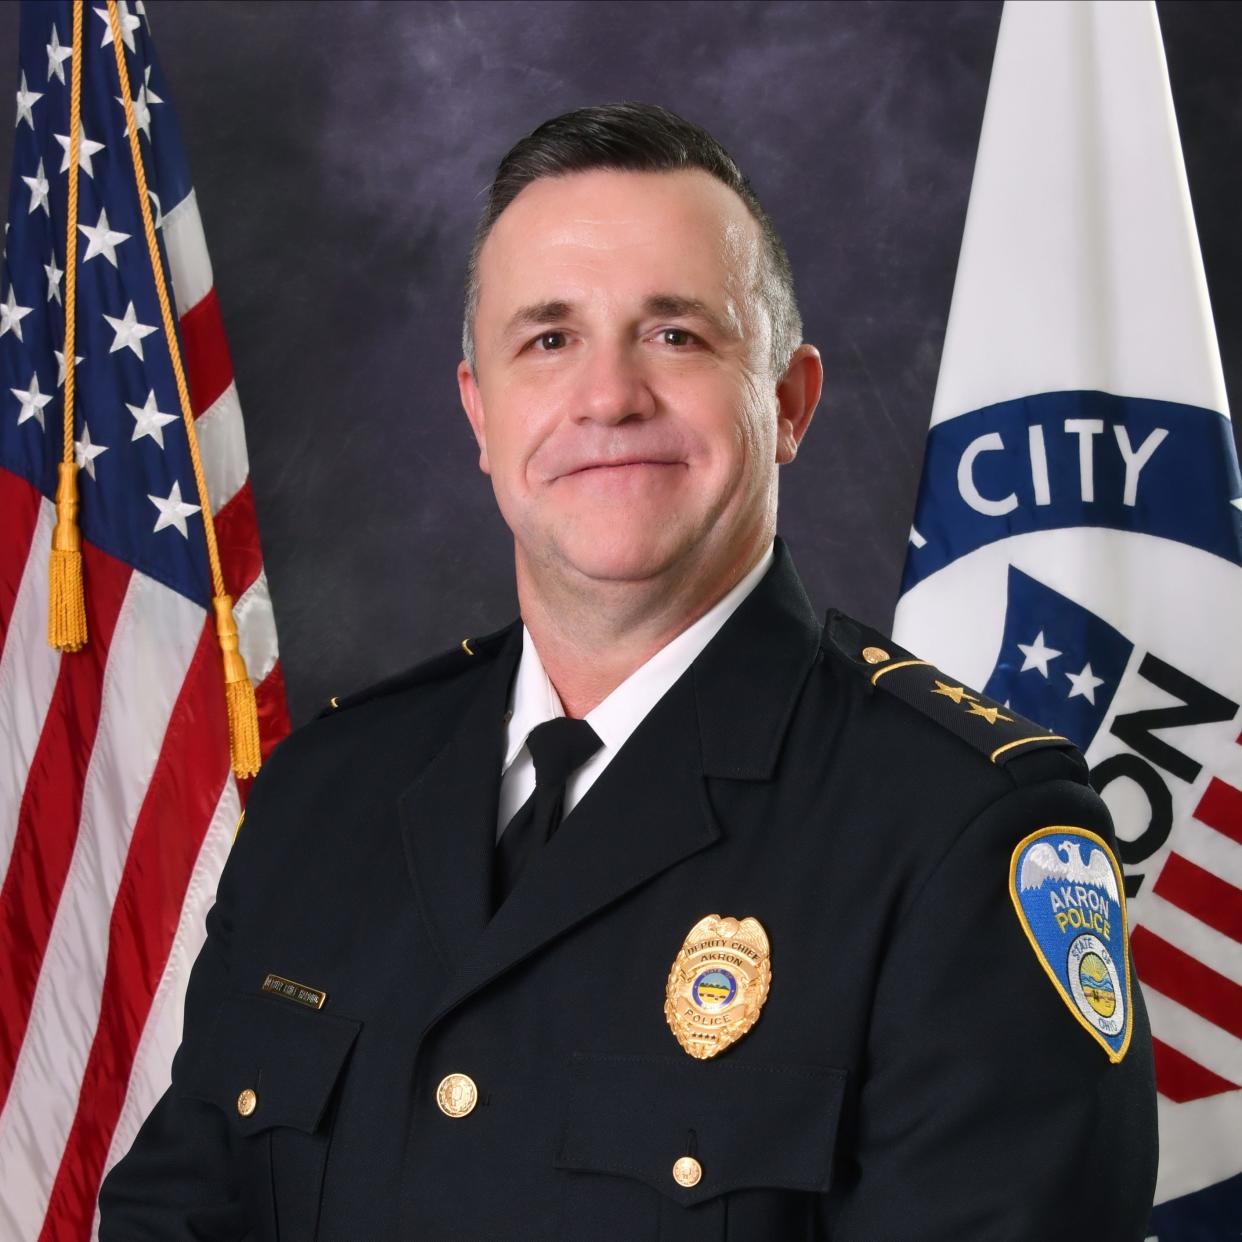 Akron Police Department Deputy Chief Brian Harding will step into the role of acting chief on Jan. 1 as Akron conducts a nationwide search for Chief Steve Mylett's replacement.